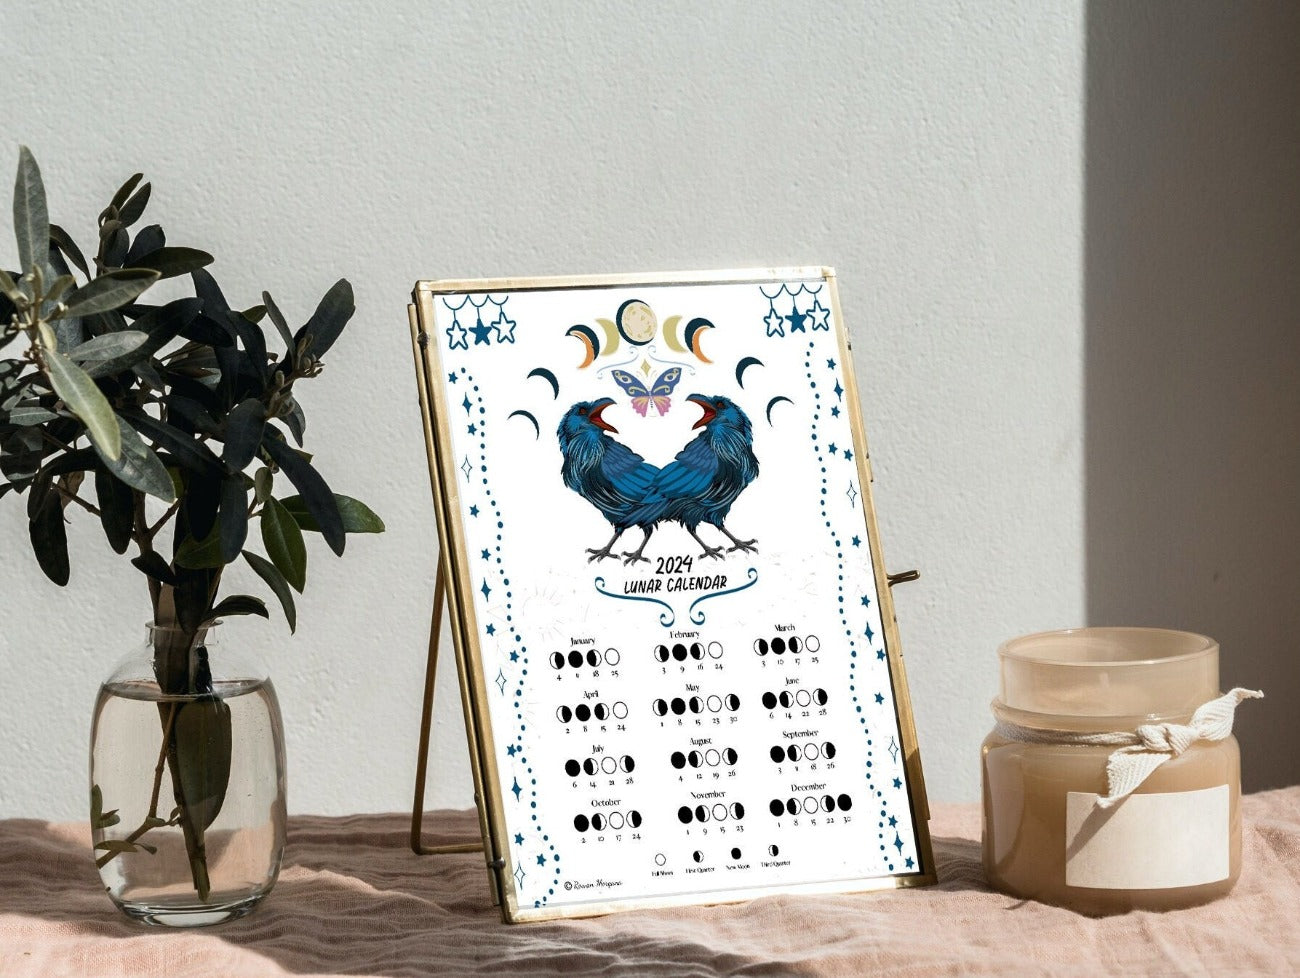 LUNAR CALENDAR 2024, Crow Moon, Wicca Witch Moon Phase Lunar Cycle Chart, Printable Spellbook Page, Makes a Great Gift - Morgana Magick Spell